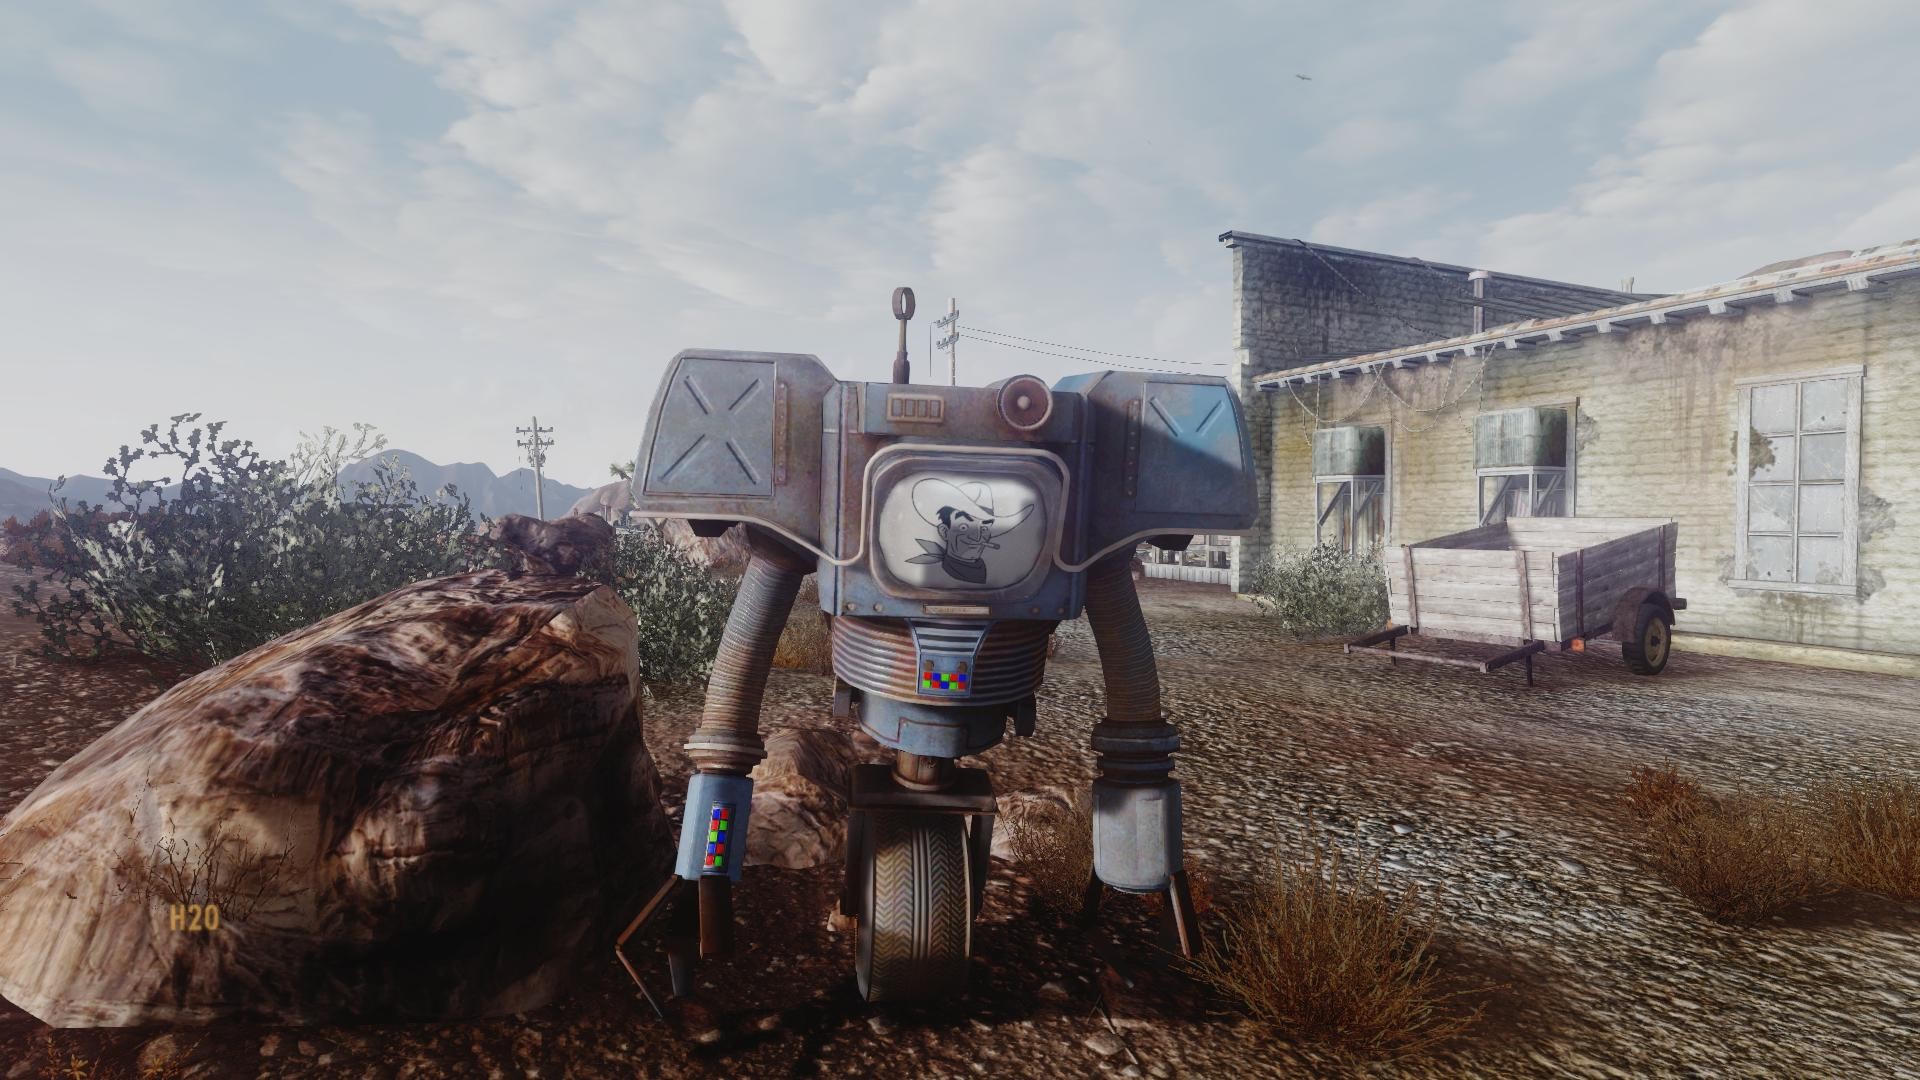 Modded Fallout: New Vegas Looks Stunning in 1080p Three Years After Launch